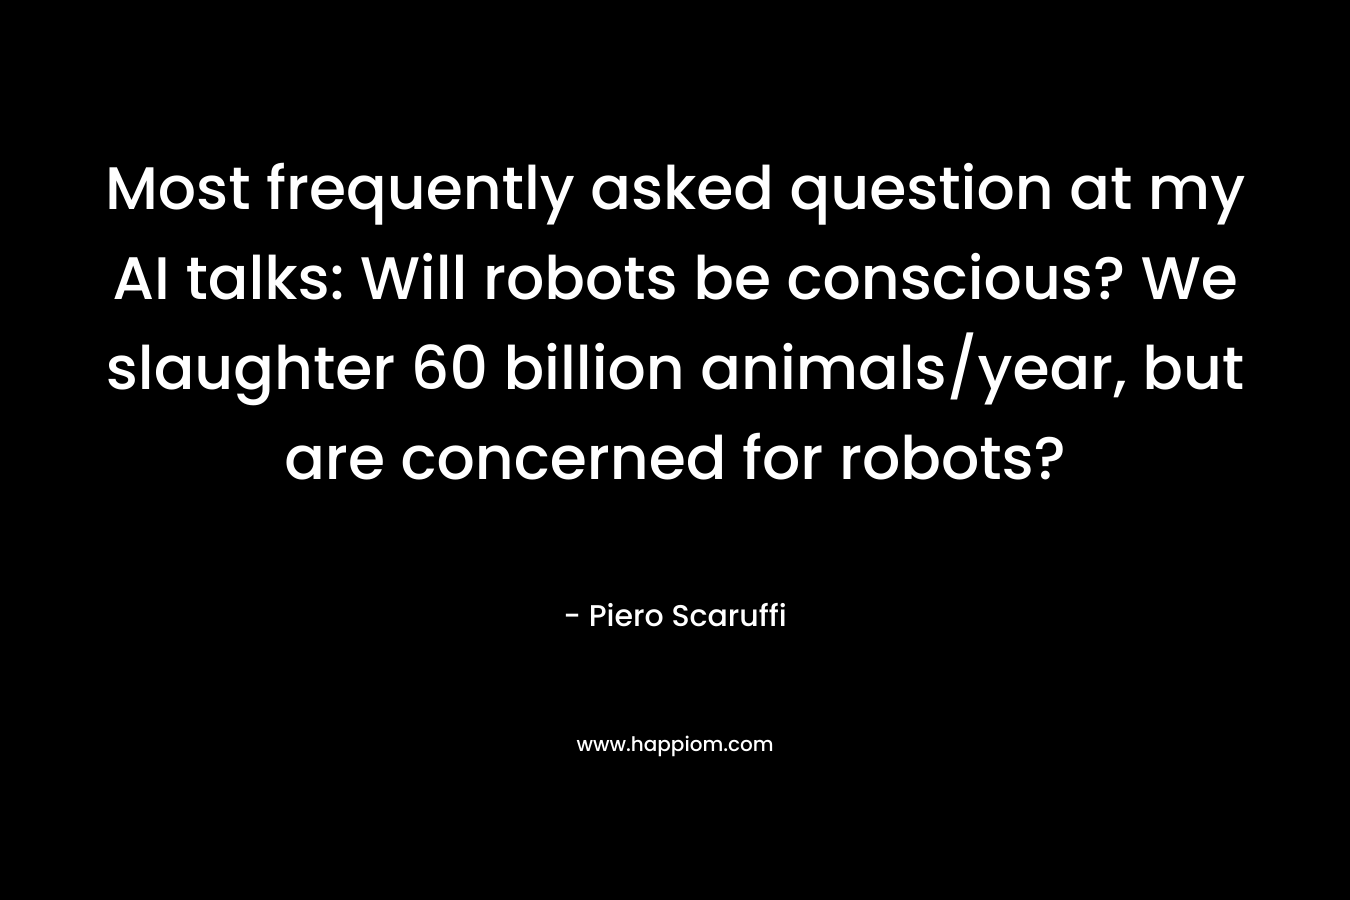 Most frequently asked question at my AI talks: Will robots be conscious? We slaughter 60 billion animals/year, but are concerned for robots? – Piero Scaruffi